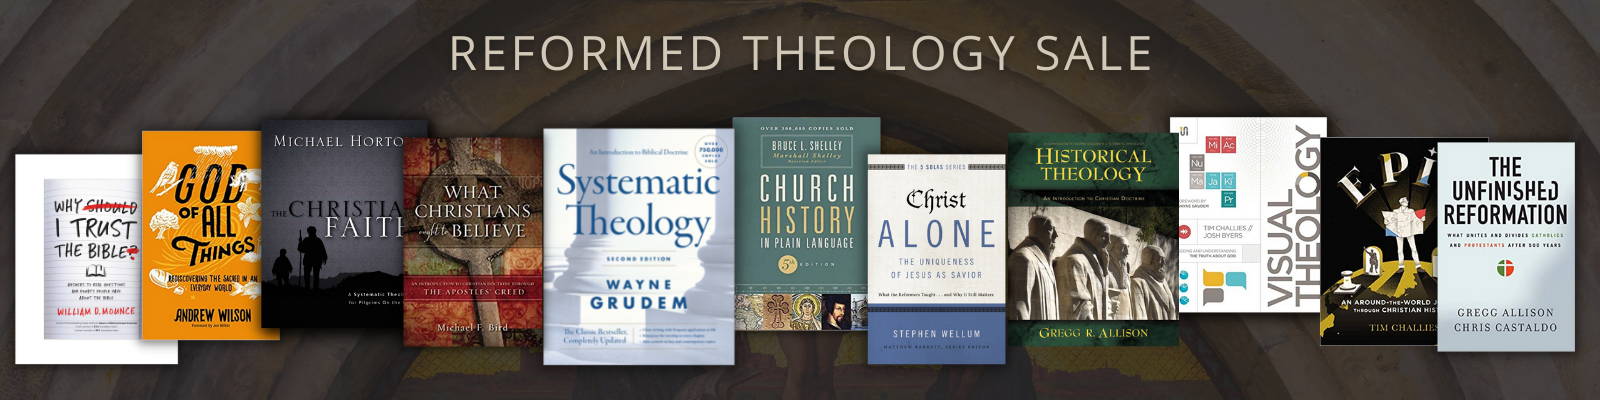 Reformed Theology Sale